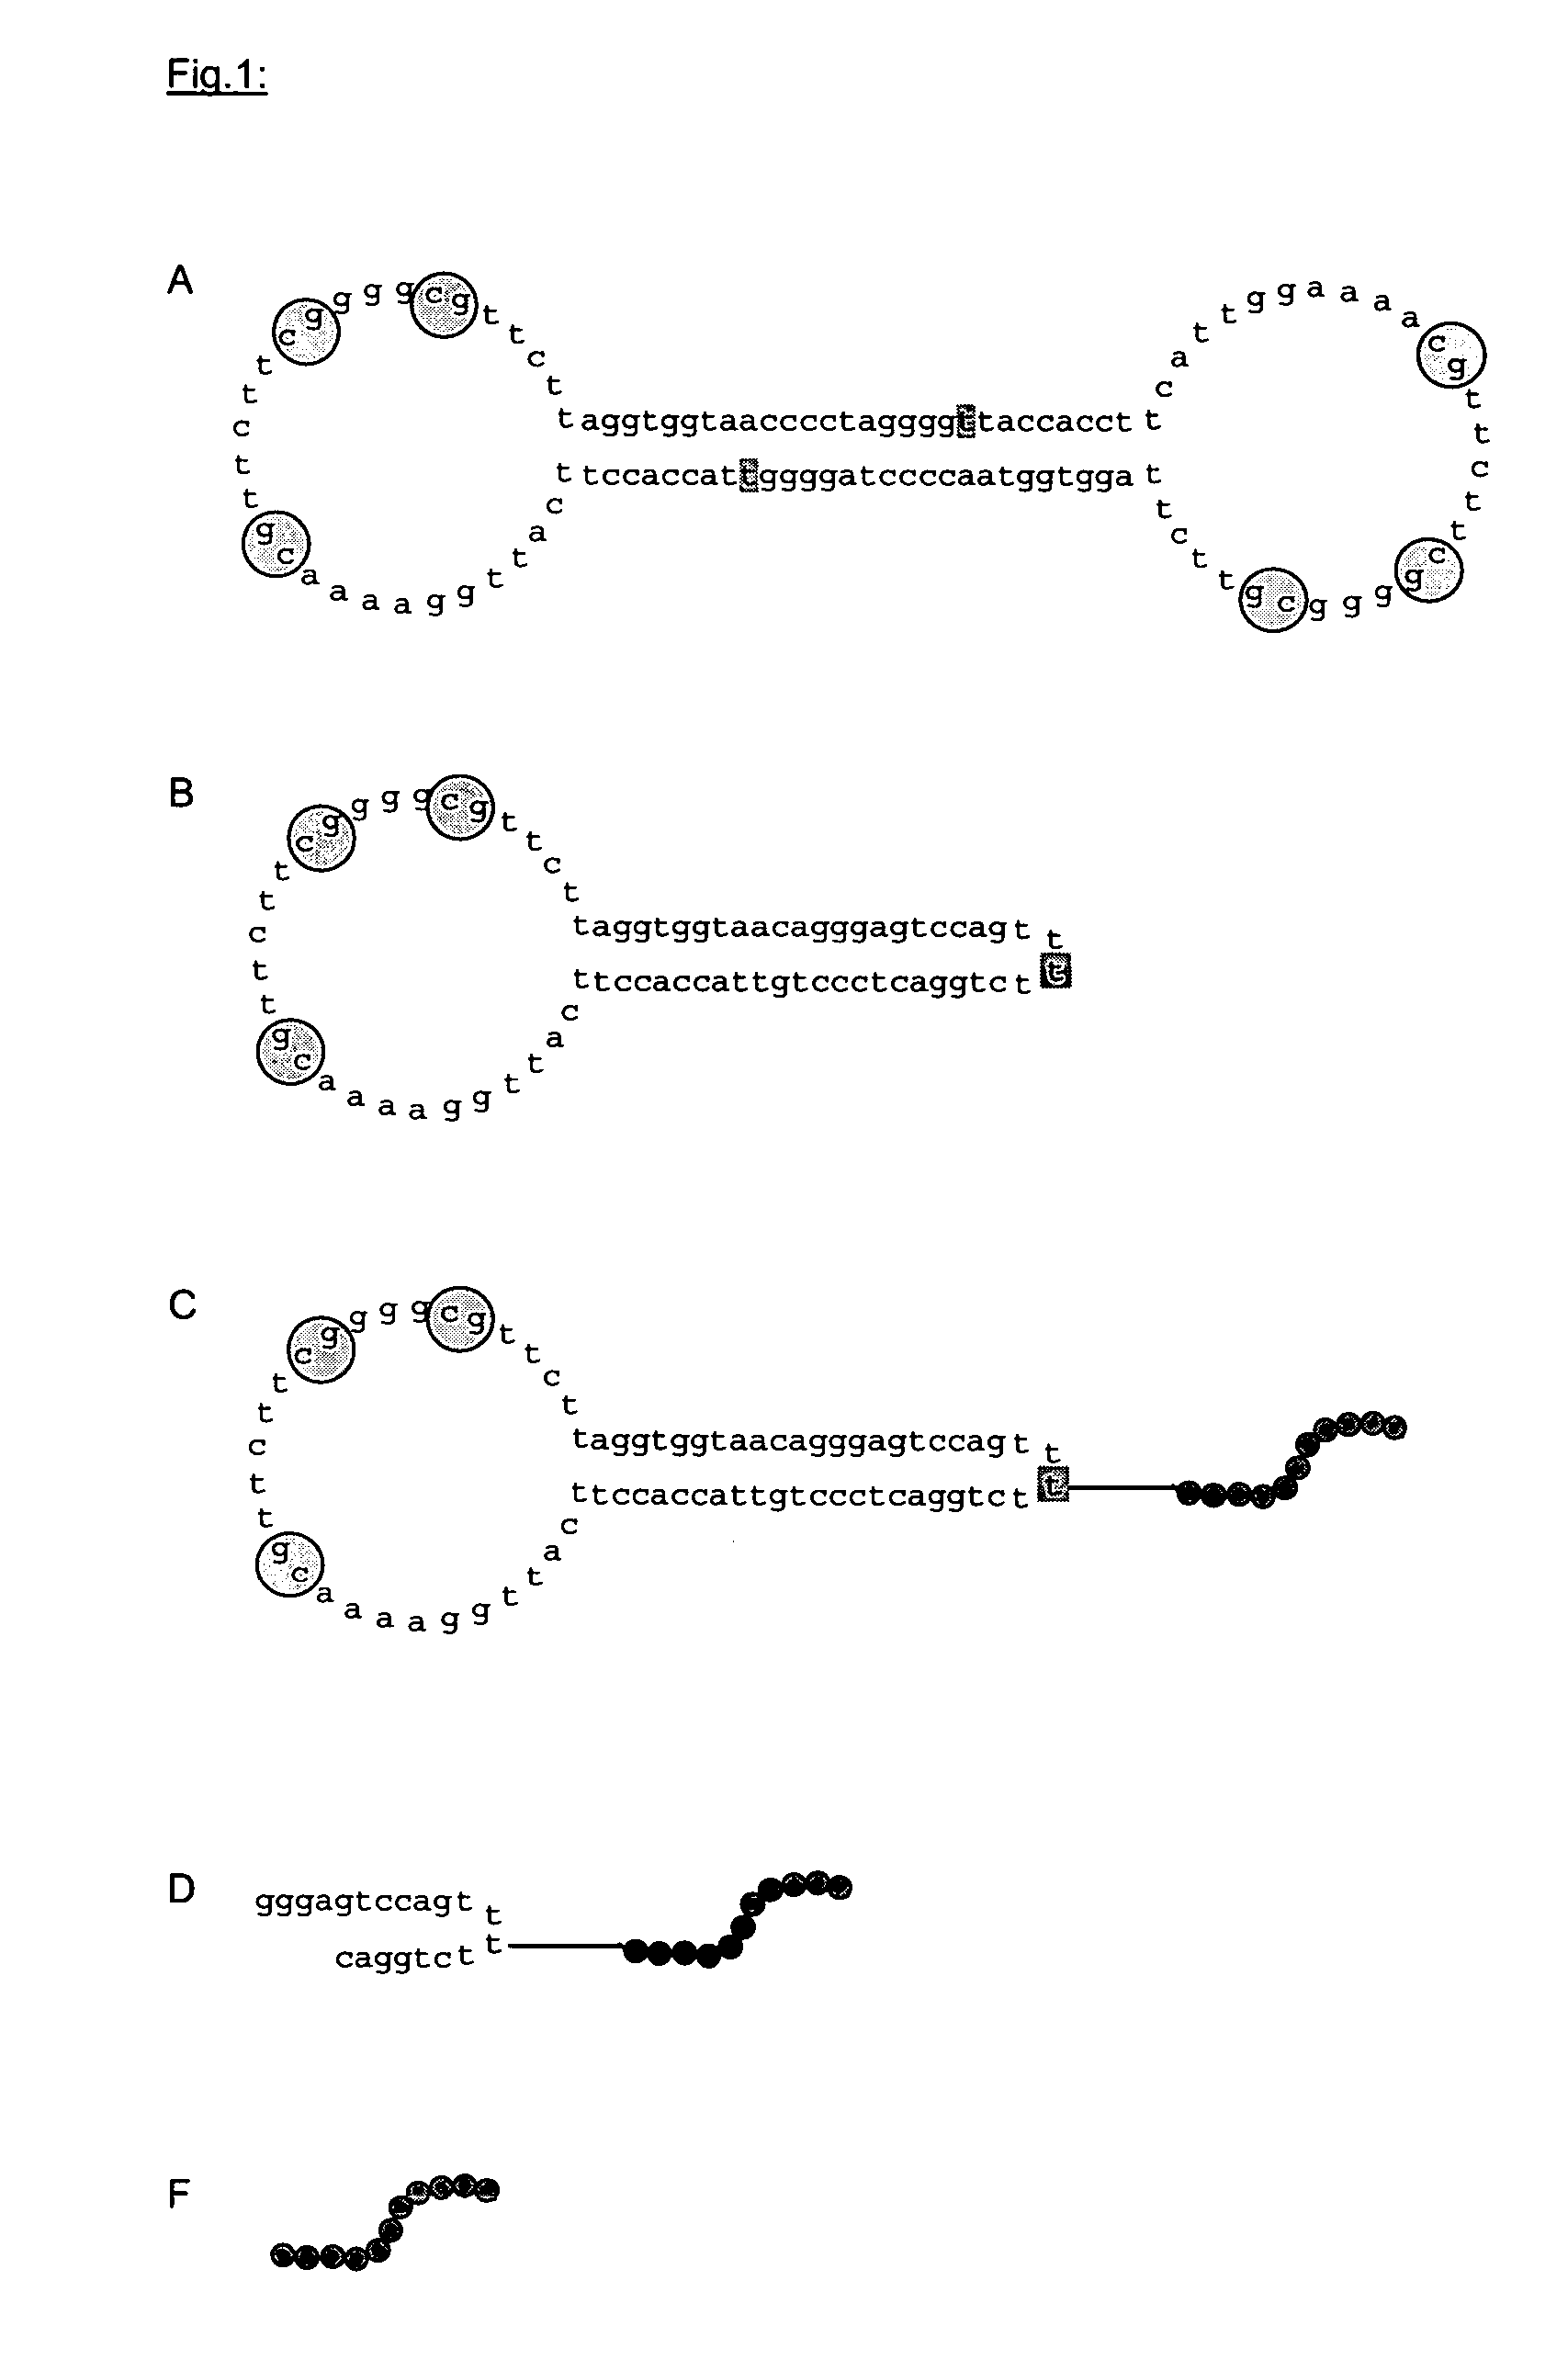 Substituted, non-coding nucleic acid molecule for therapeutic and prophylactic stimulation of the immune system in humans and higher animals